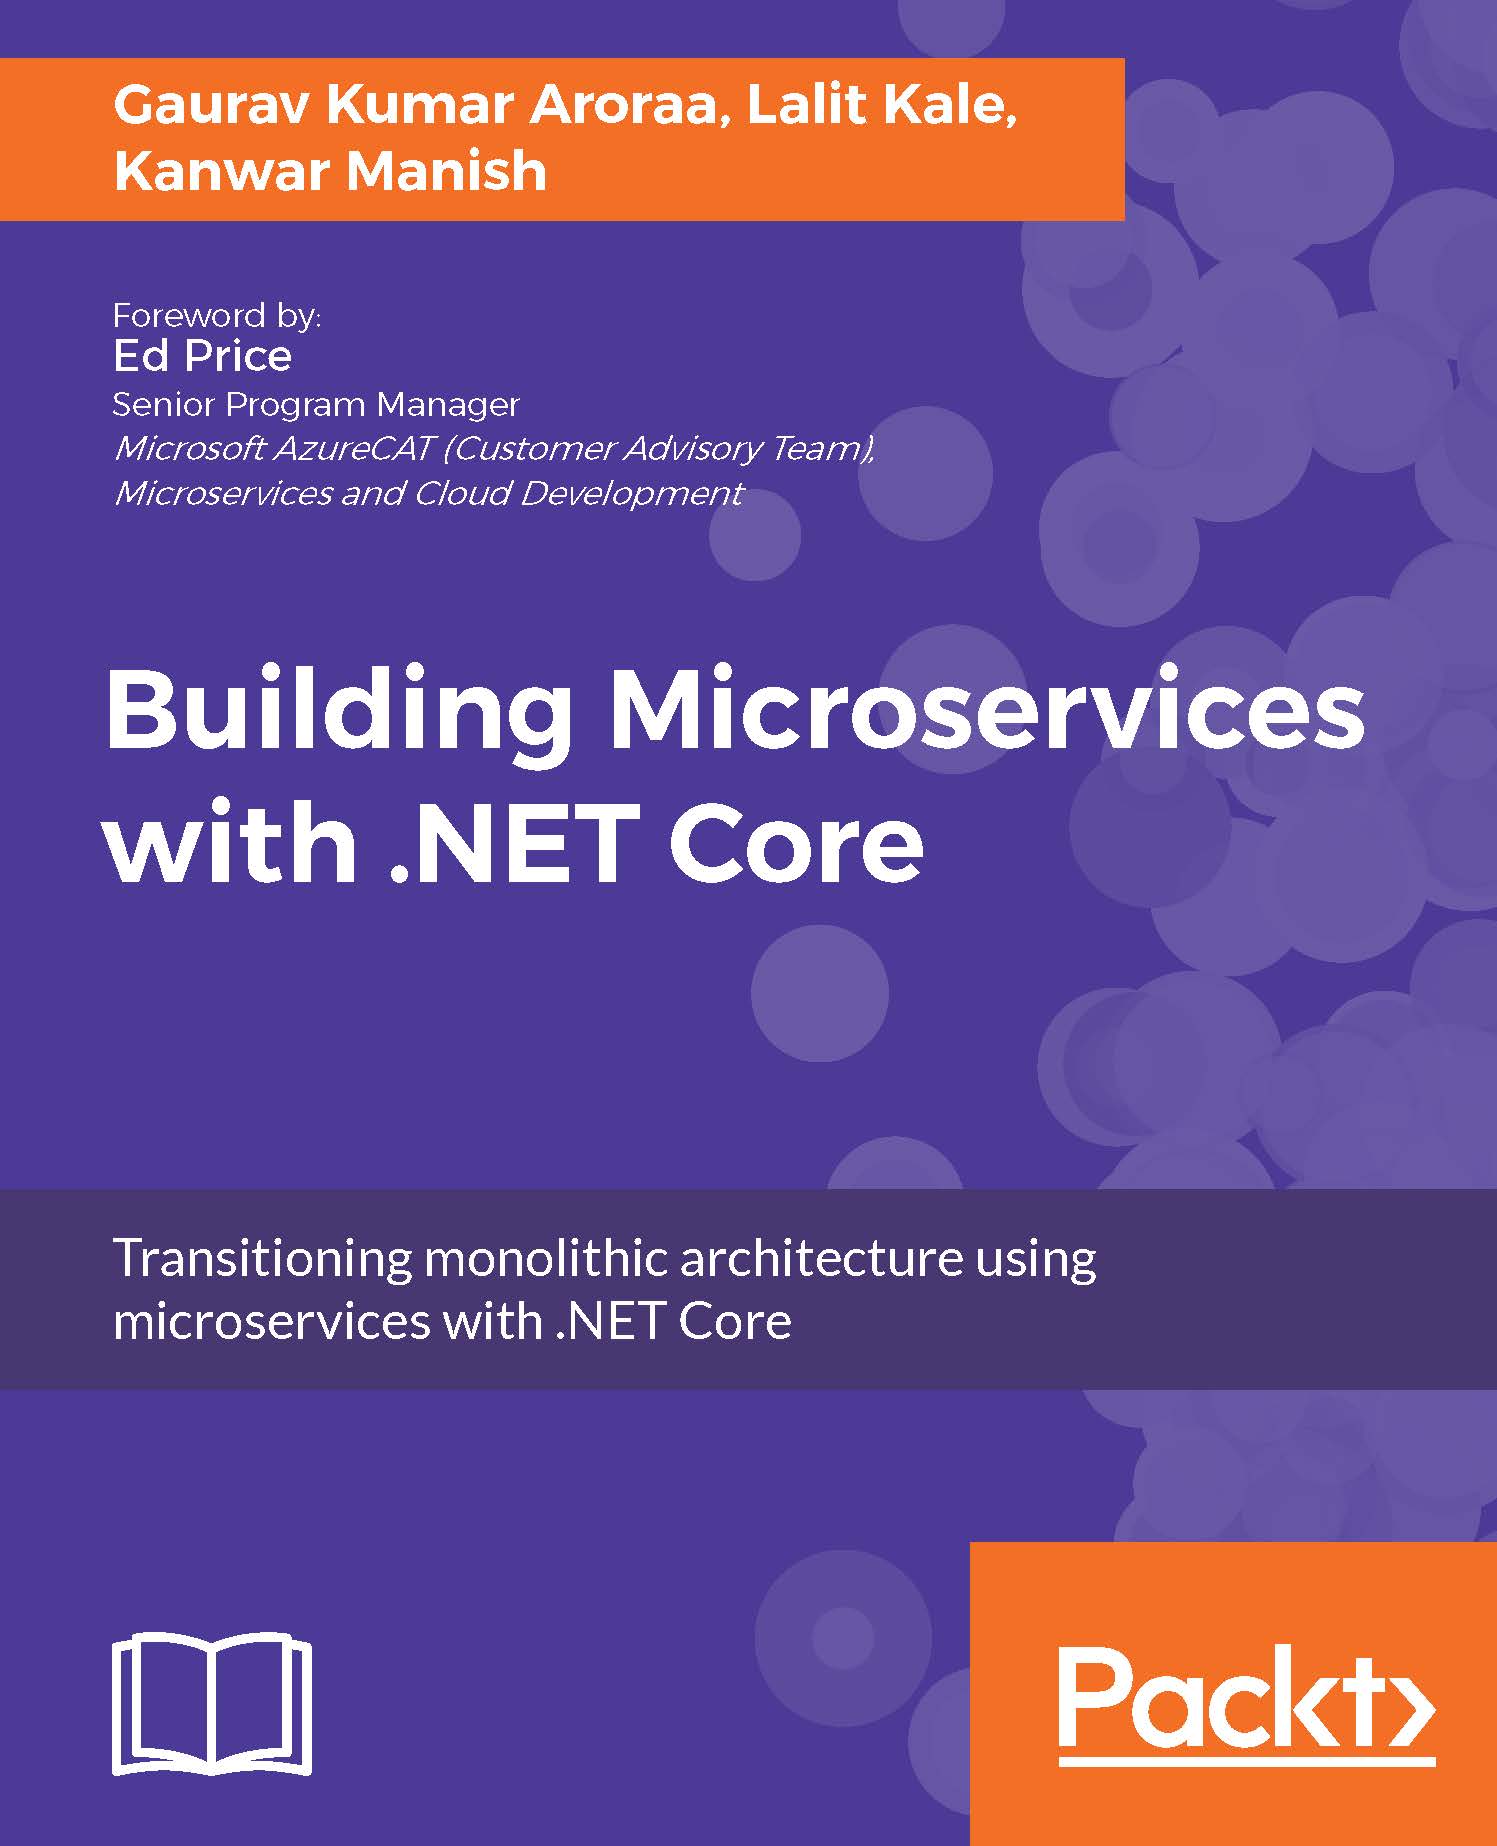 Building Microservices with .NET Core: Develop skills in Reactive Microservices, database scaling, Azure Microservices, and more